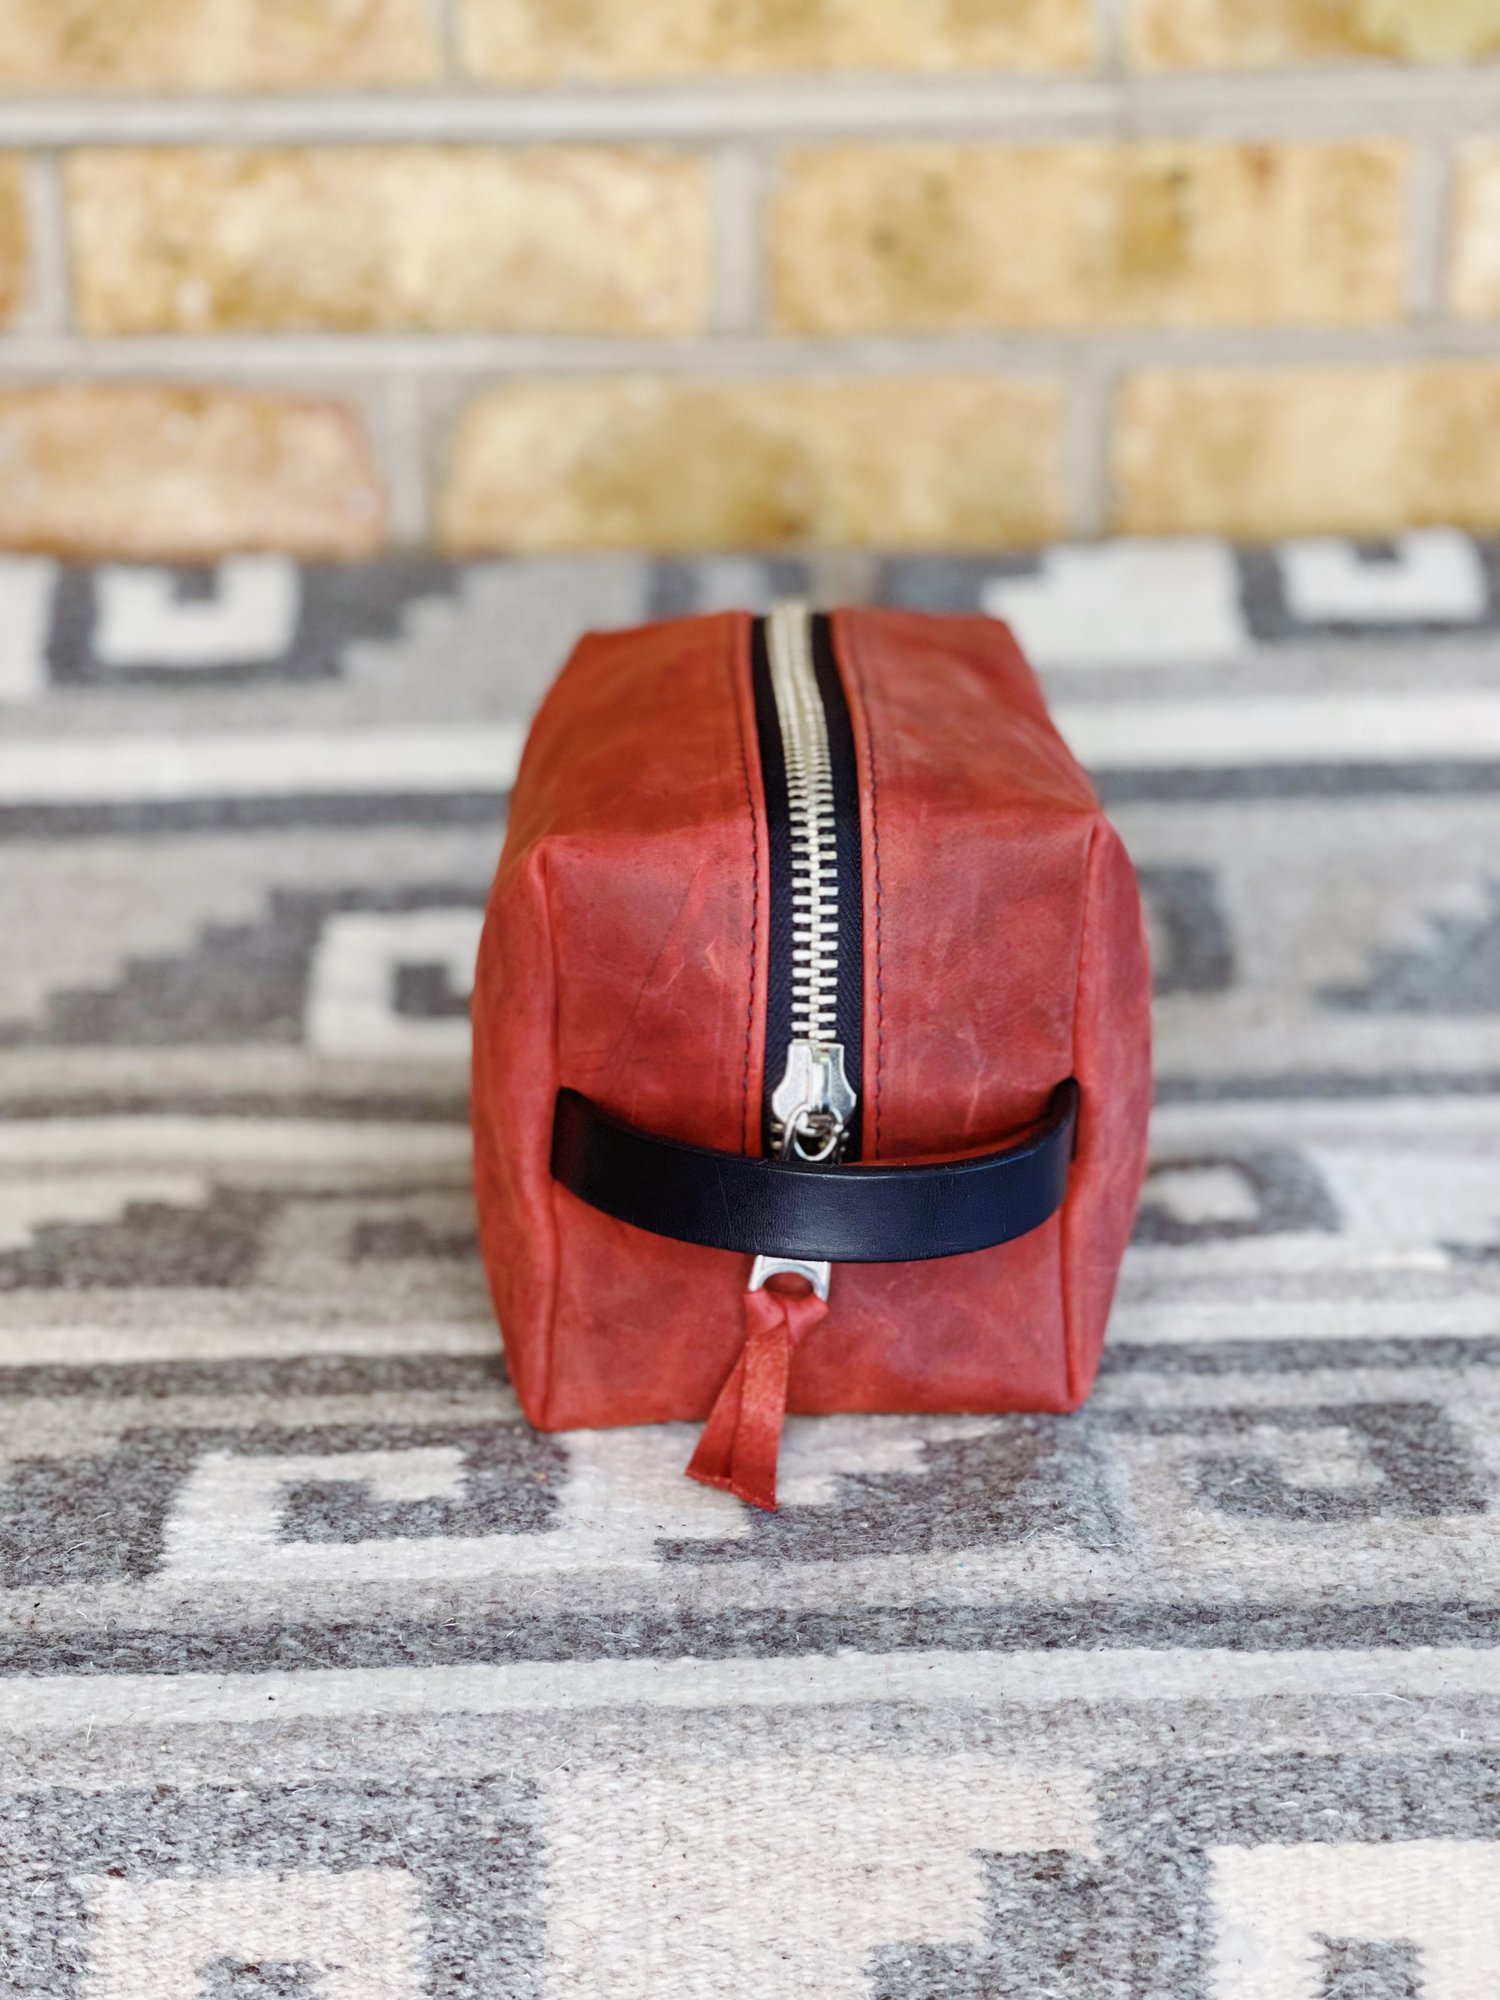 Toiletry Bag , Red Brown